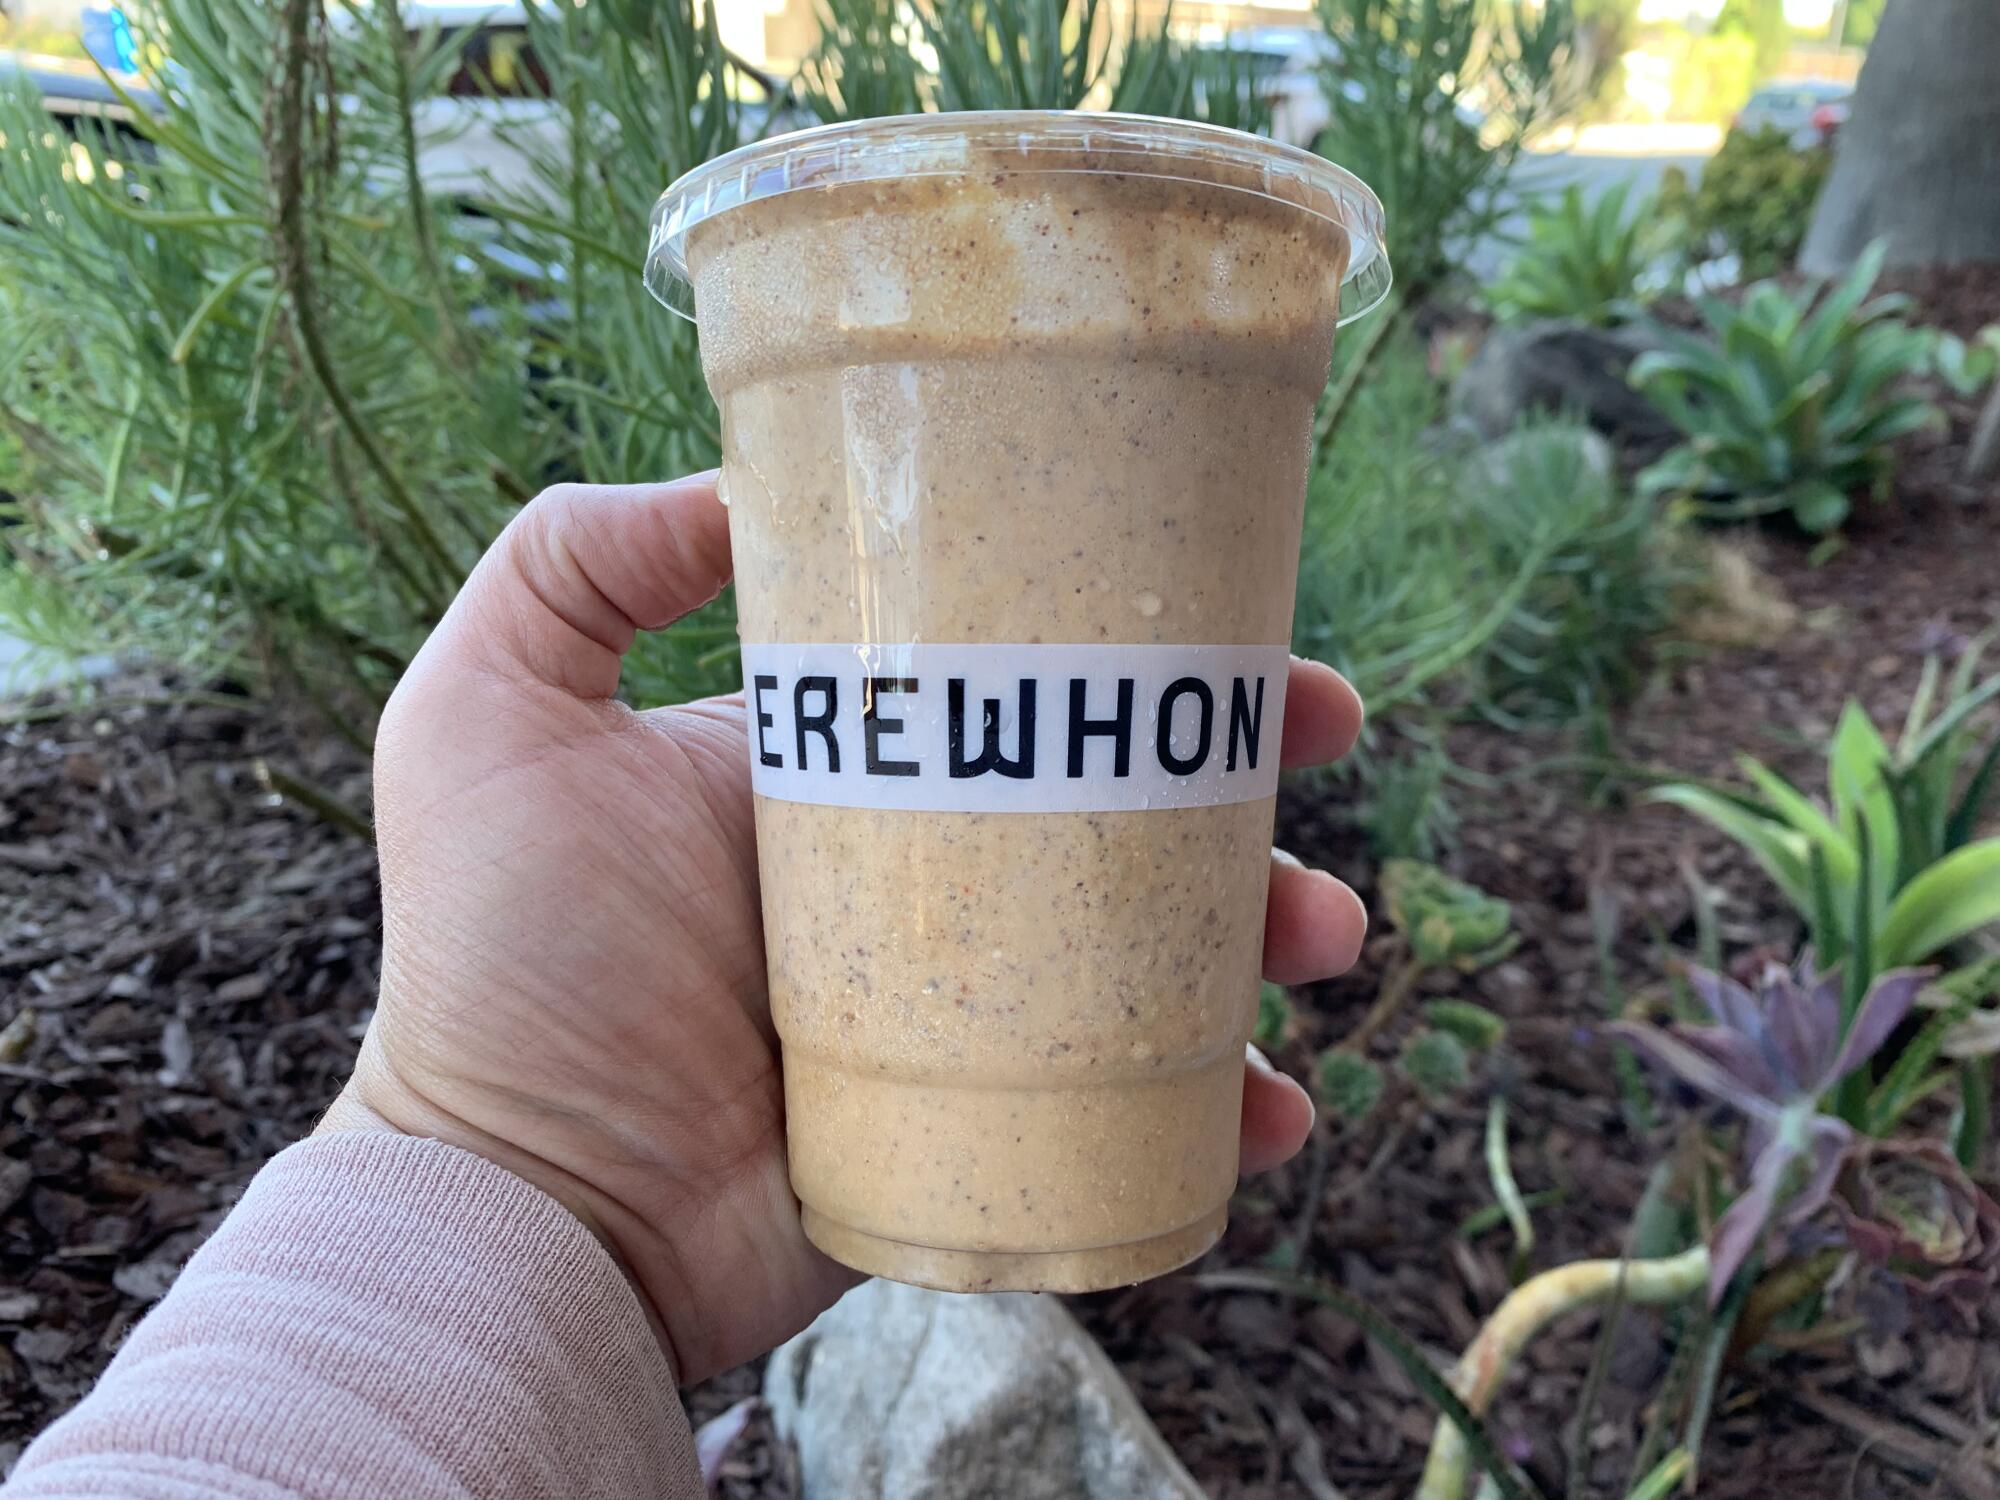 A hand holds a orangey brown smoothie in a plastic cup that says Erewhon.